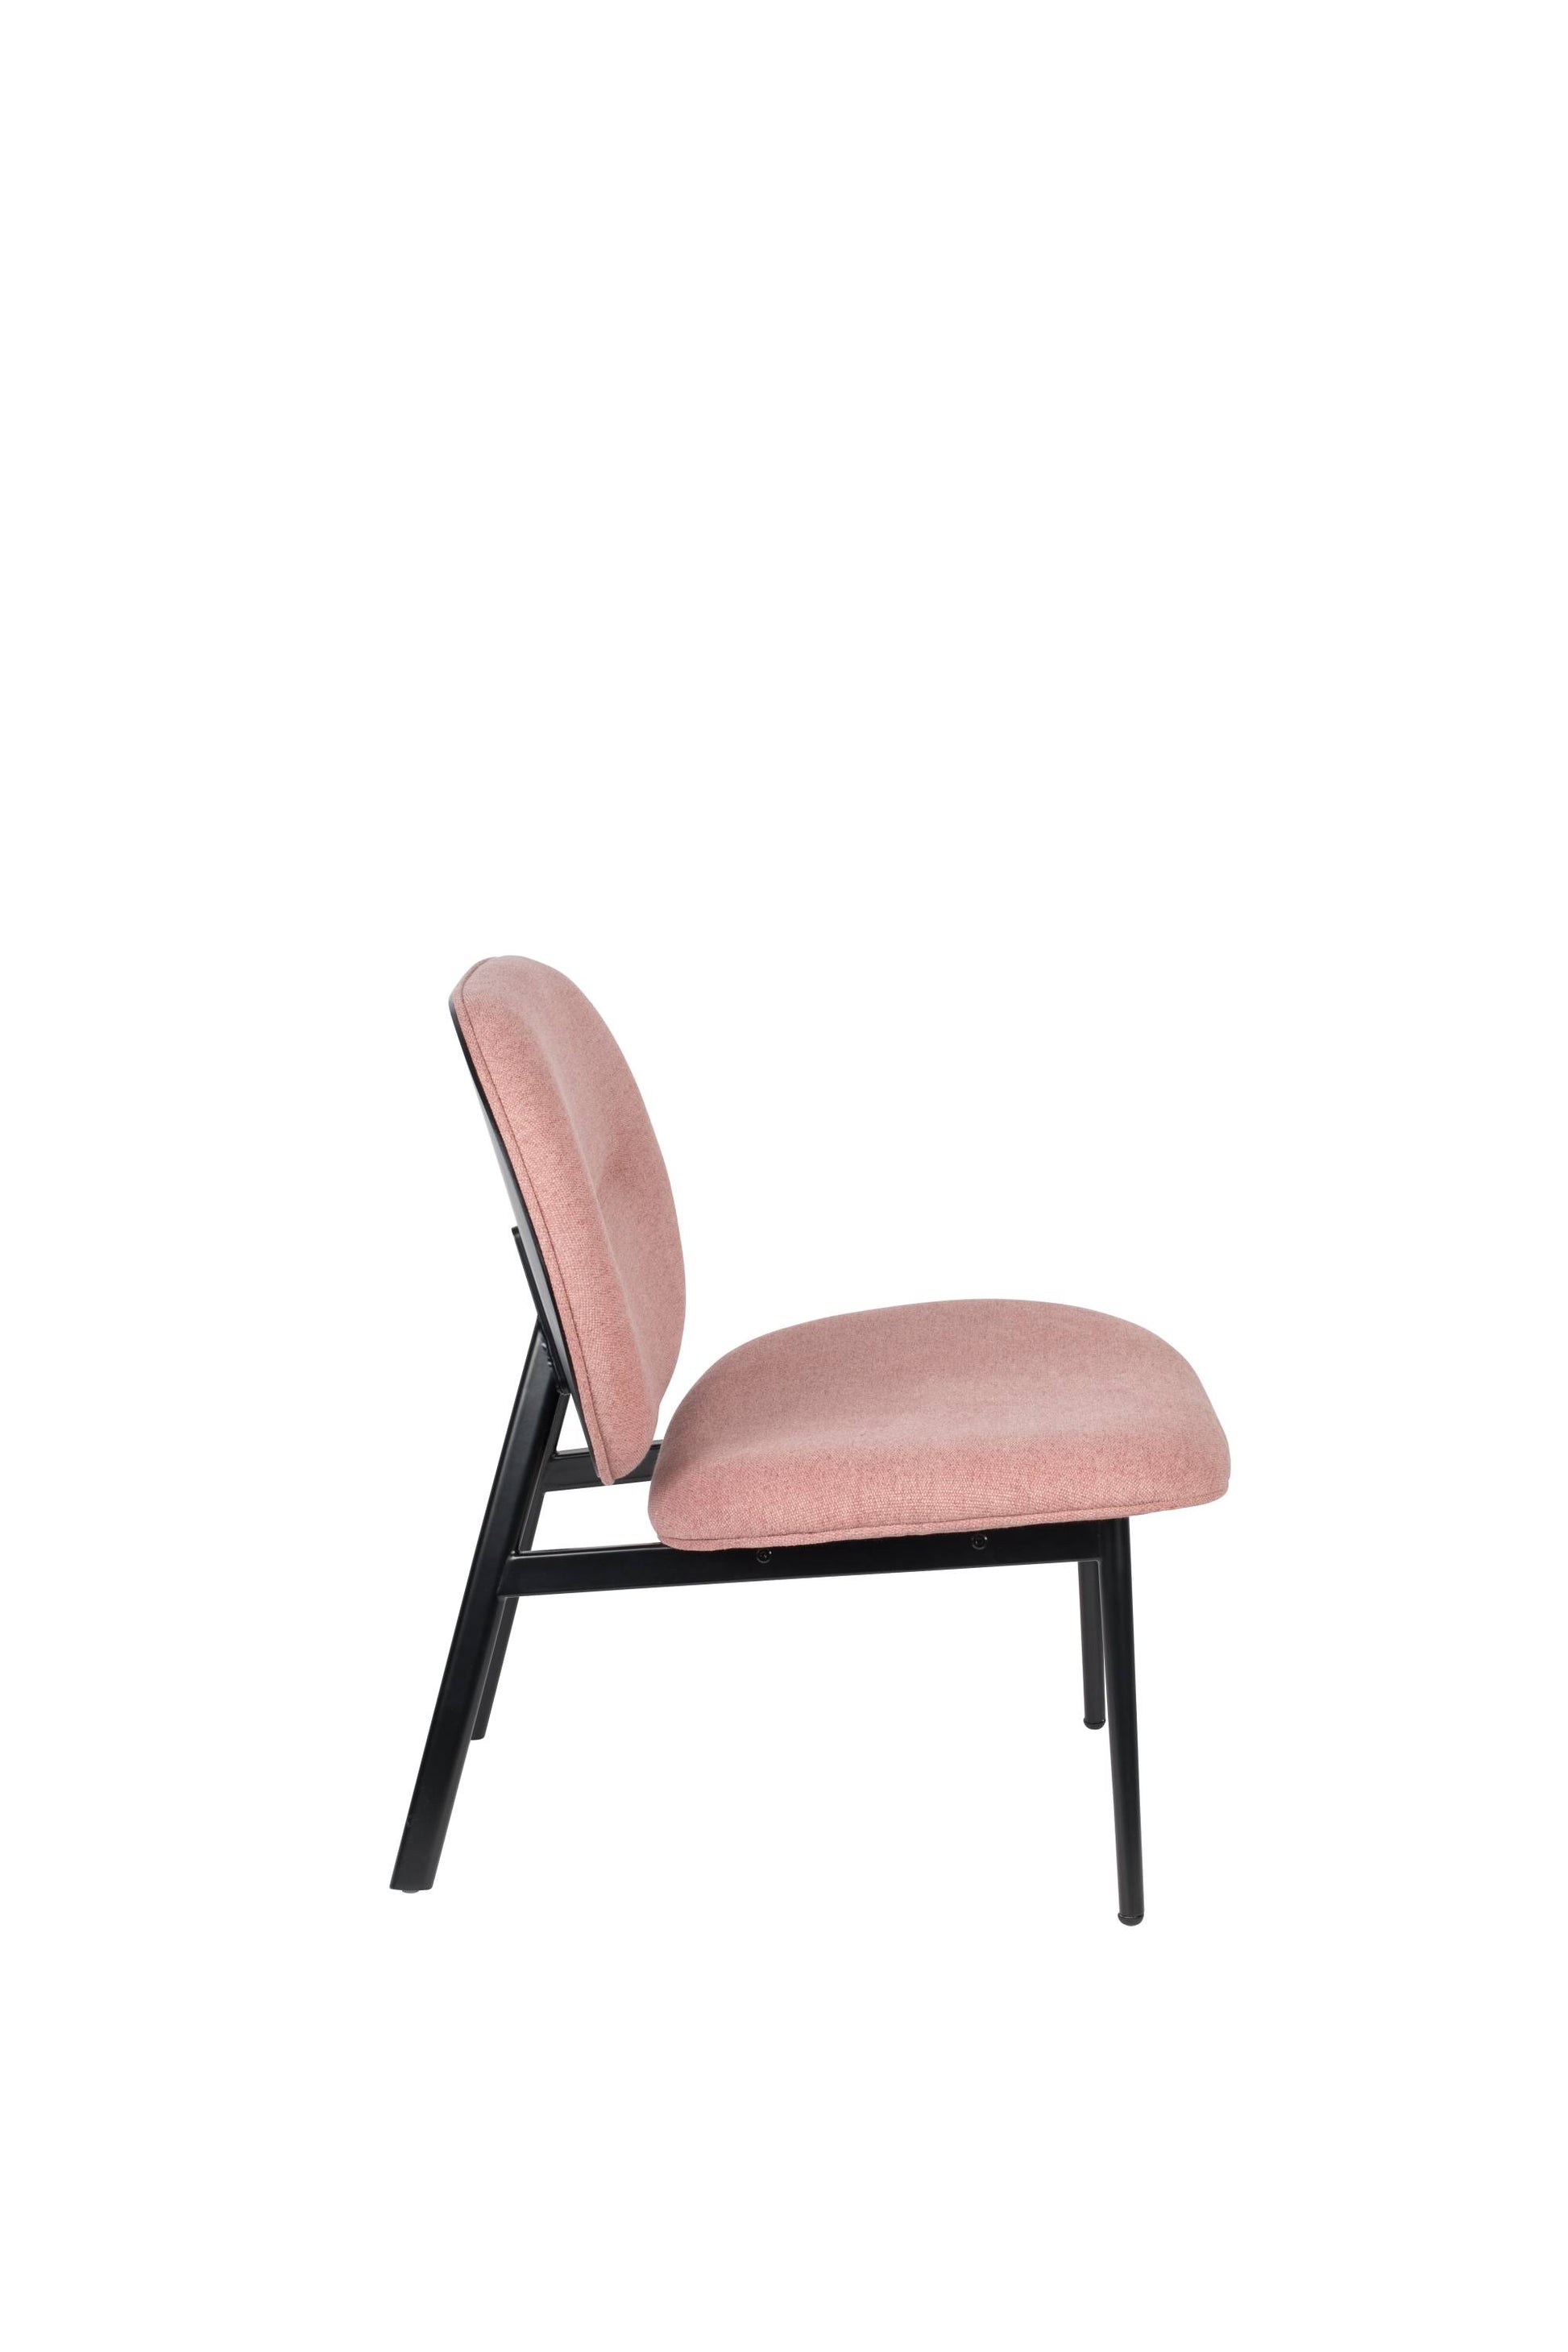 Zuiver | LOUNGE CHAIR SPIKE PINK Default Title